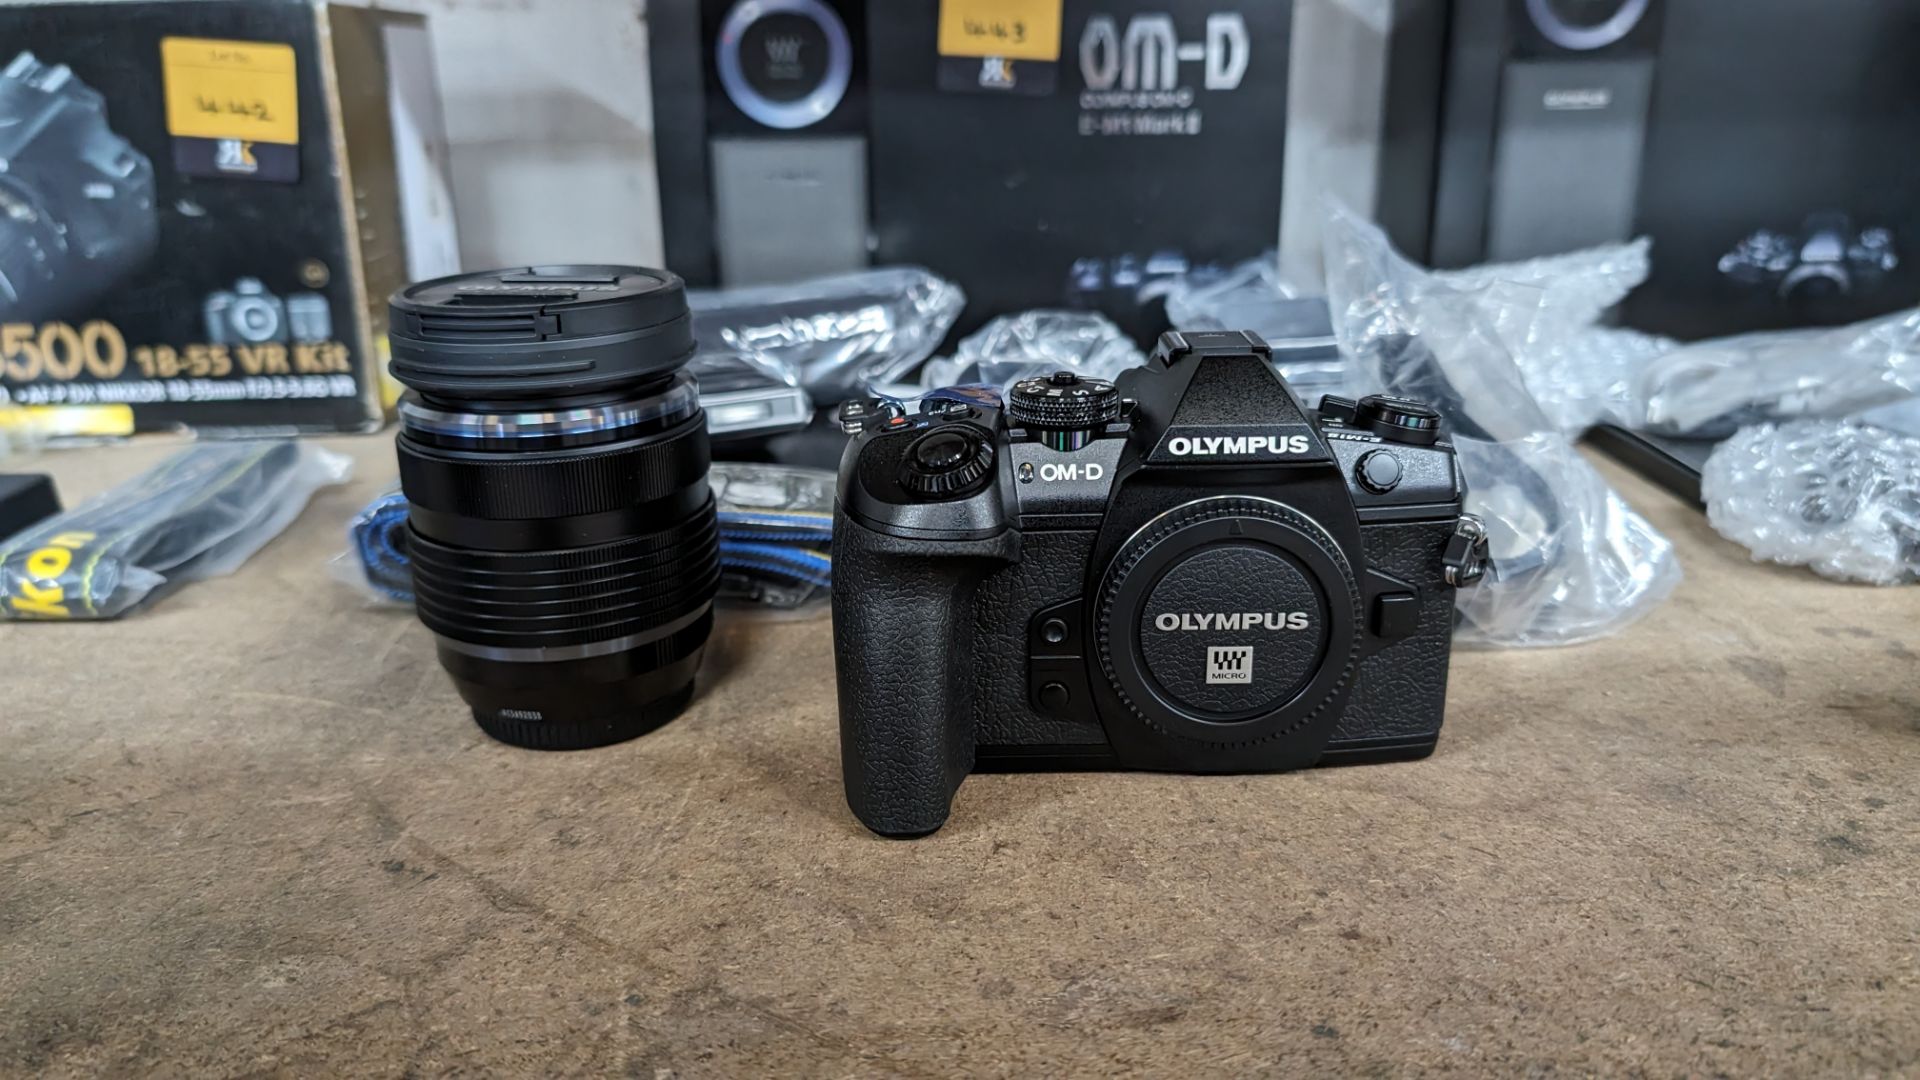 Olympus OM-D E-M1 Mark II micro camera kit, including camera body, strap, battery, charger, USB cabl - Image 2 of 15